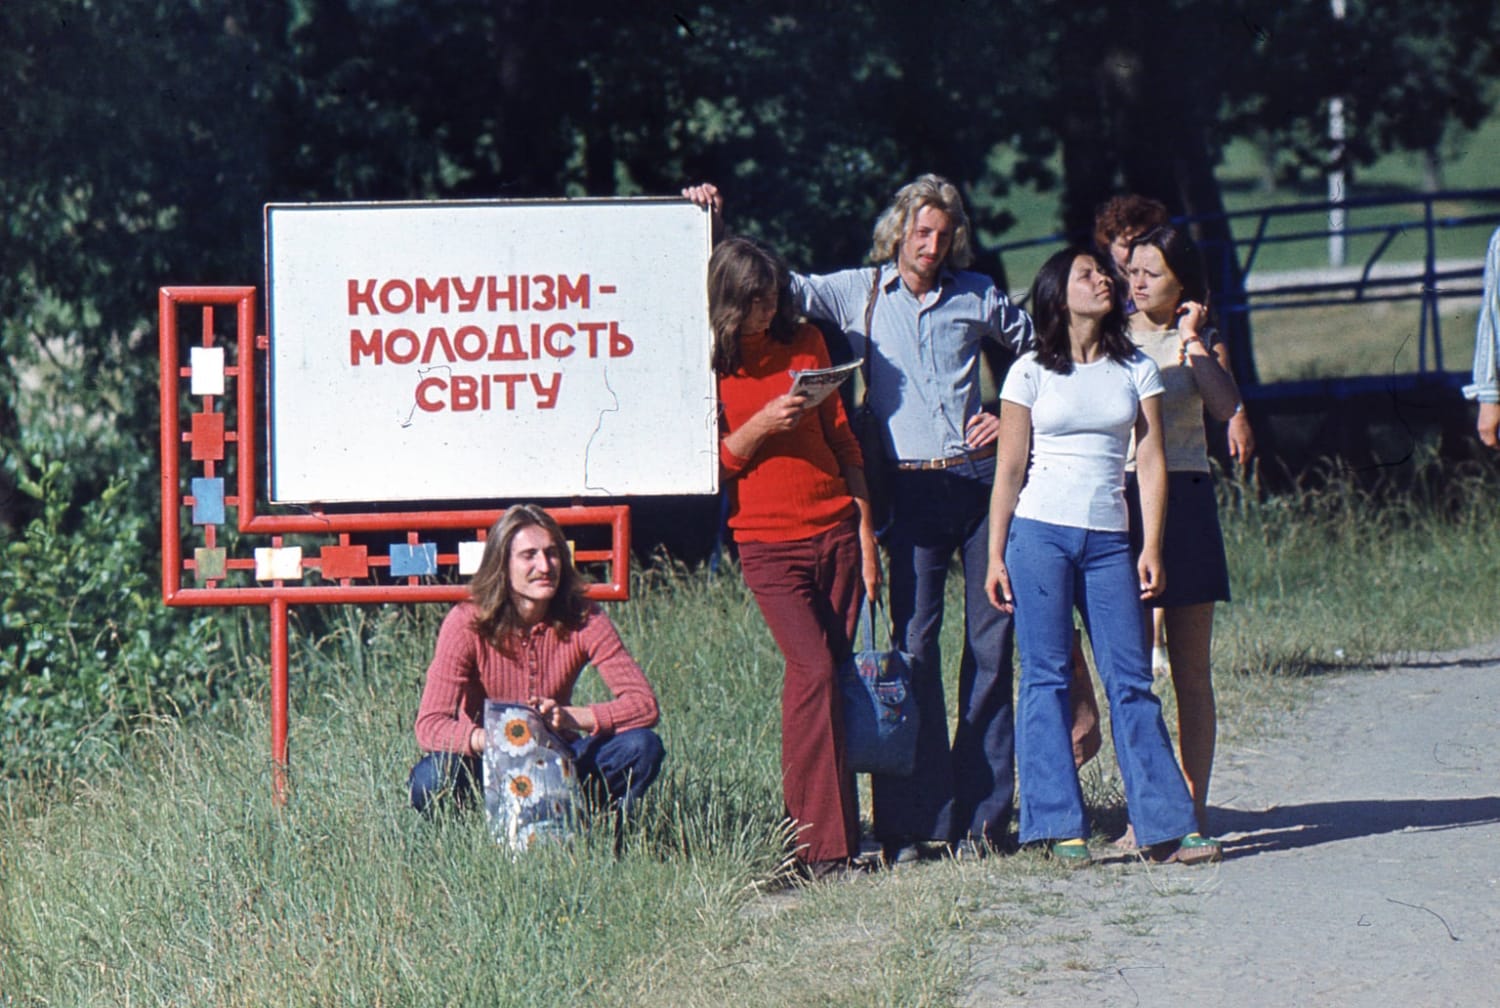 A group of hippies. Lviv, Ukraine, 1988. The sign reads: "Communism is the youthfulness of the world"